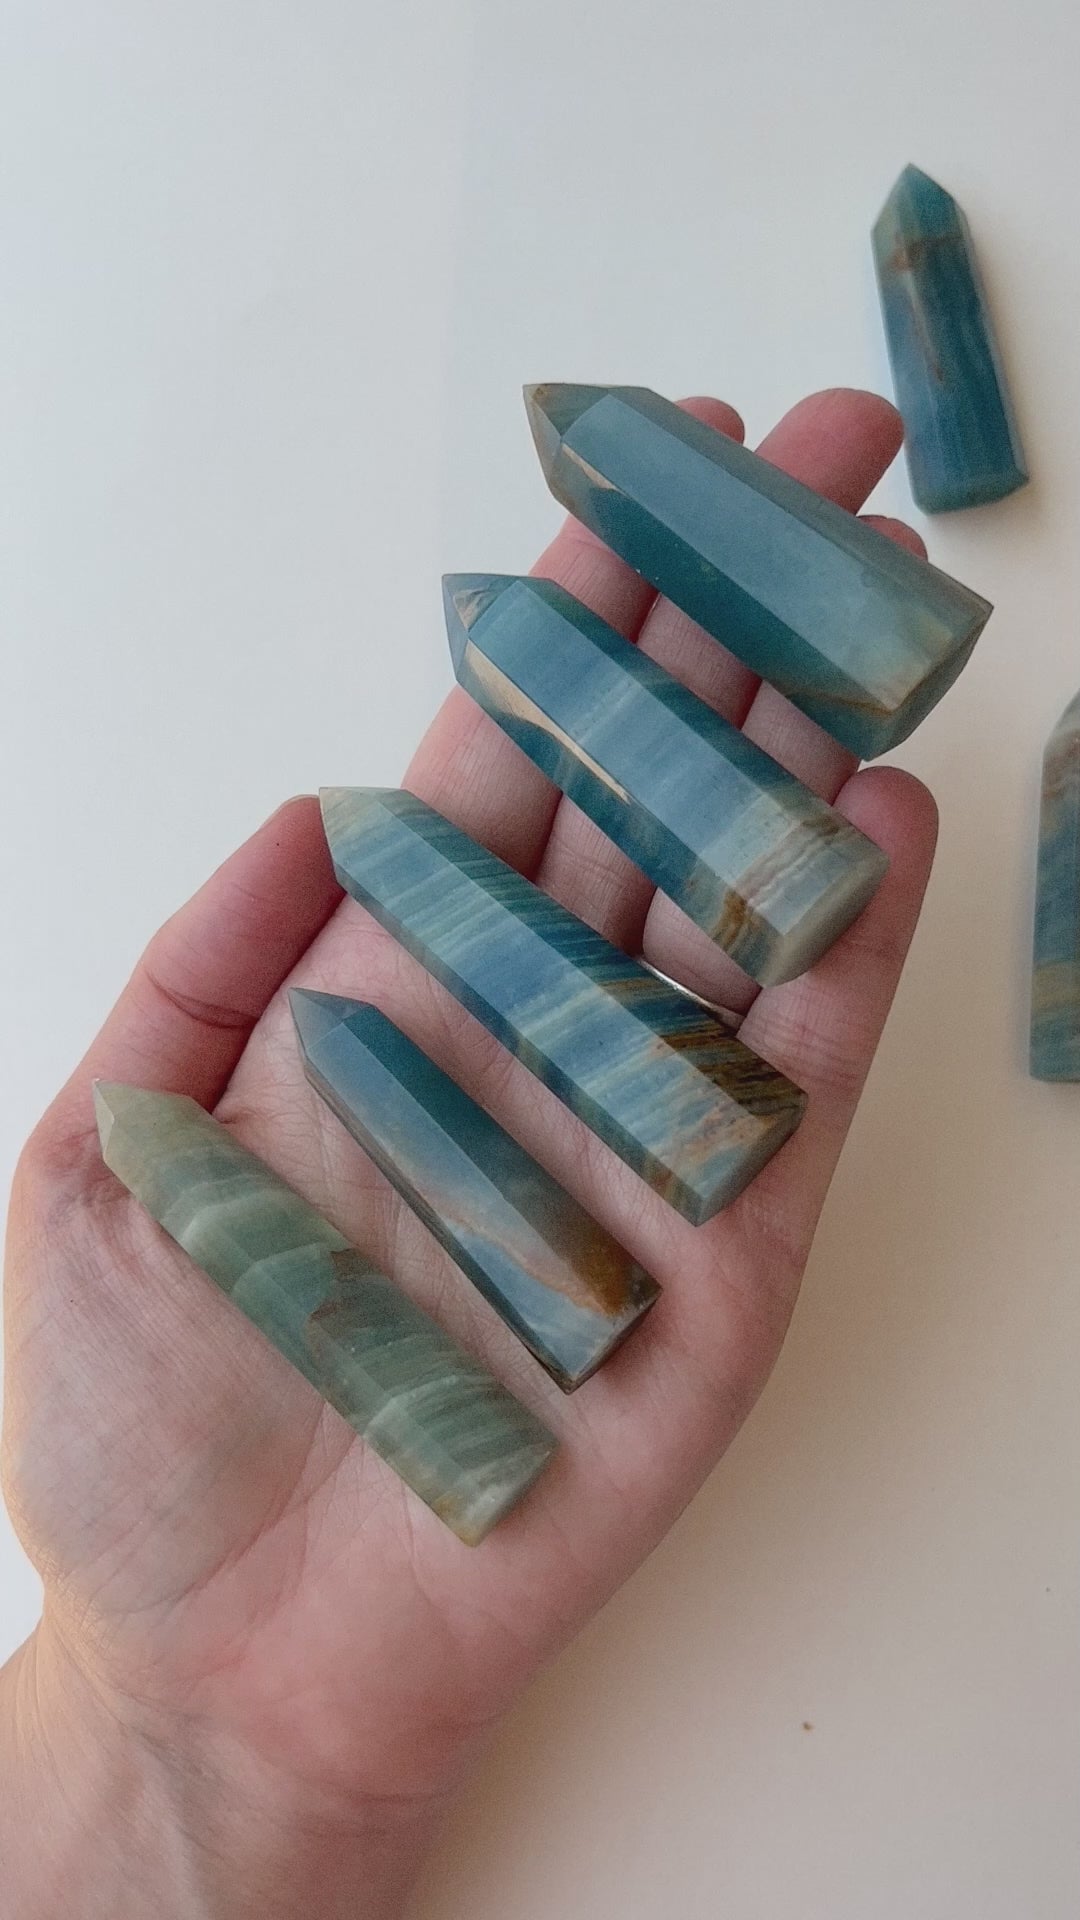 Blue Onyx Tower // Intuition + Empathy + Positivity